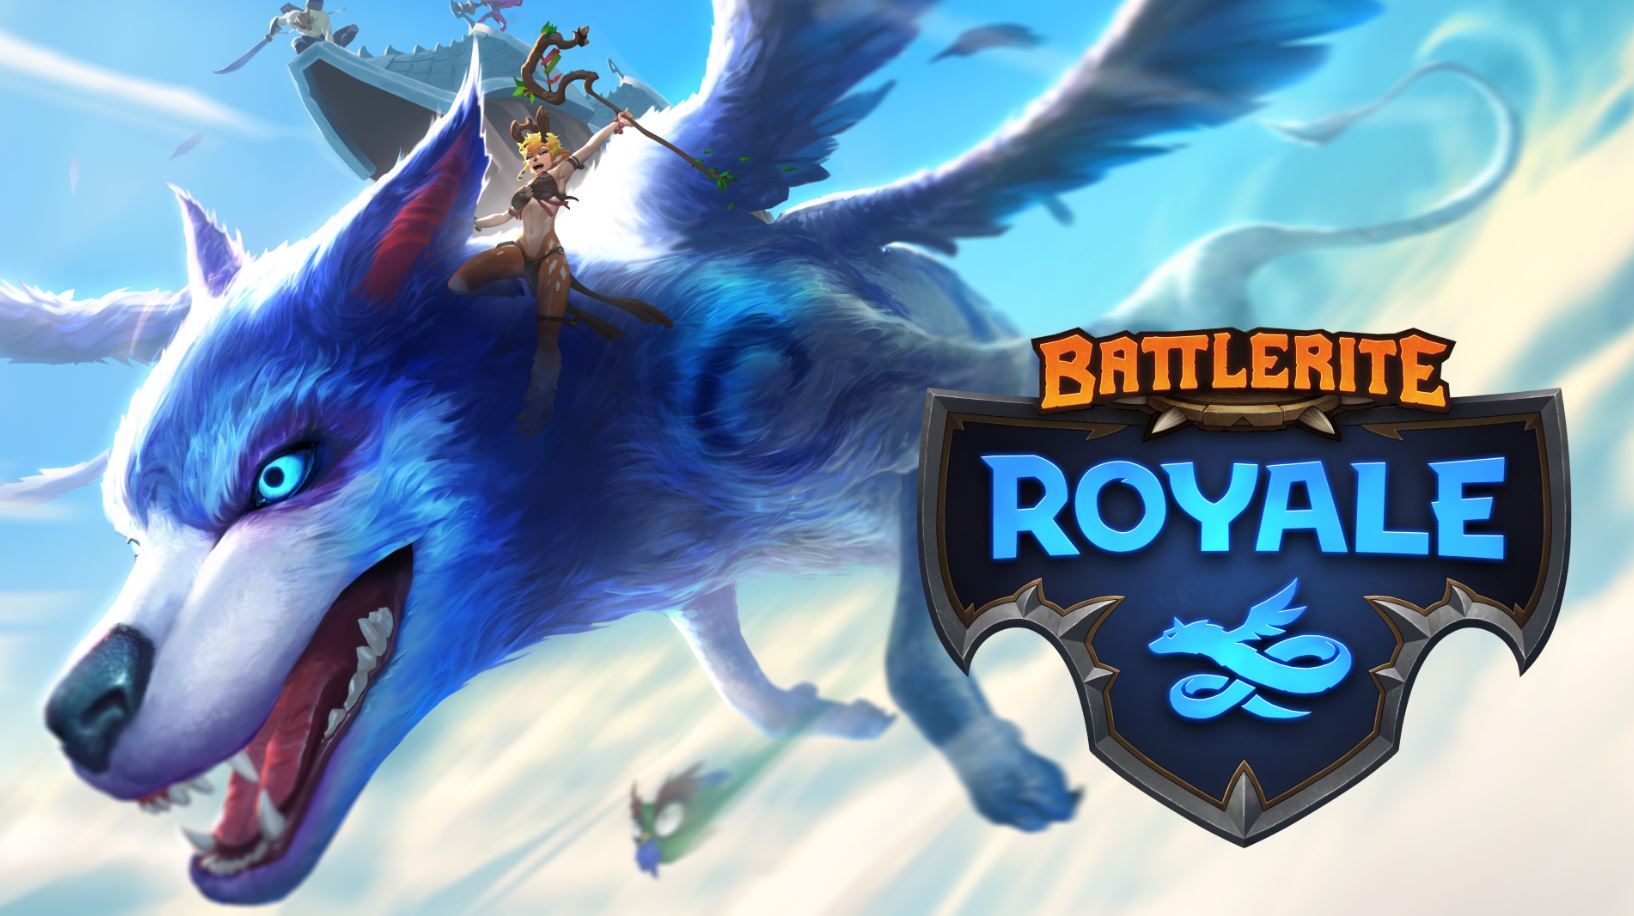 Battlerite Royale announced as a standalone game